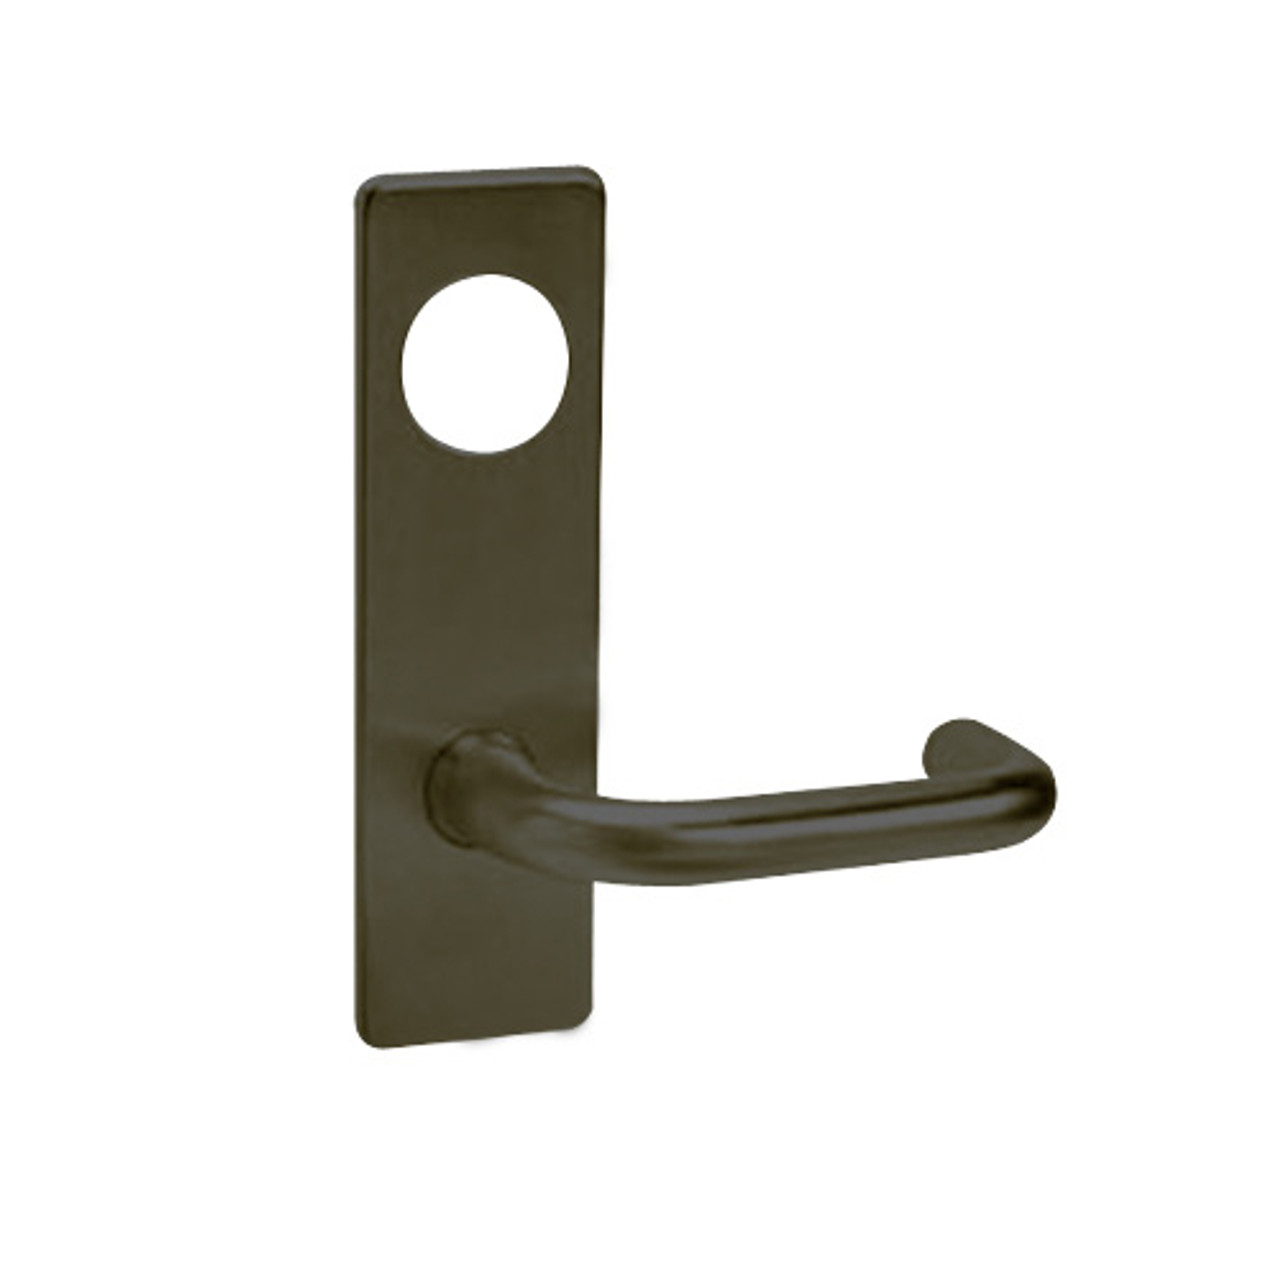 ML2067-LSR-613-LC Corbin Russwin ML2000 Series Mortise Apartment Locksets with Lustra Lever in Oil Rubbed Bronze